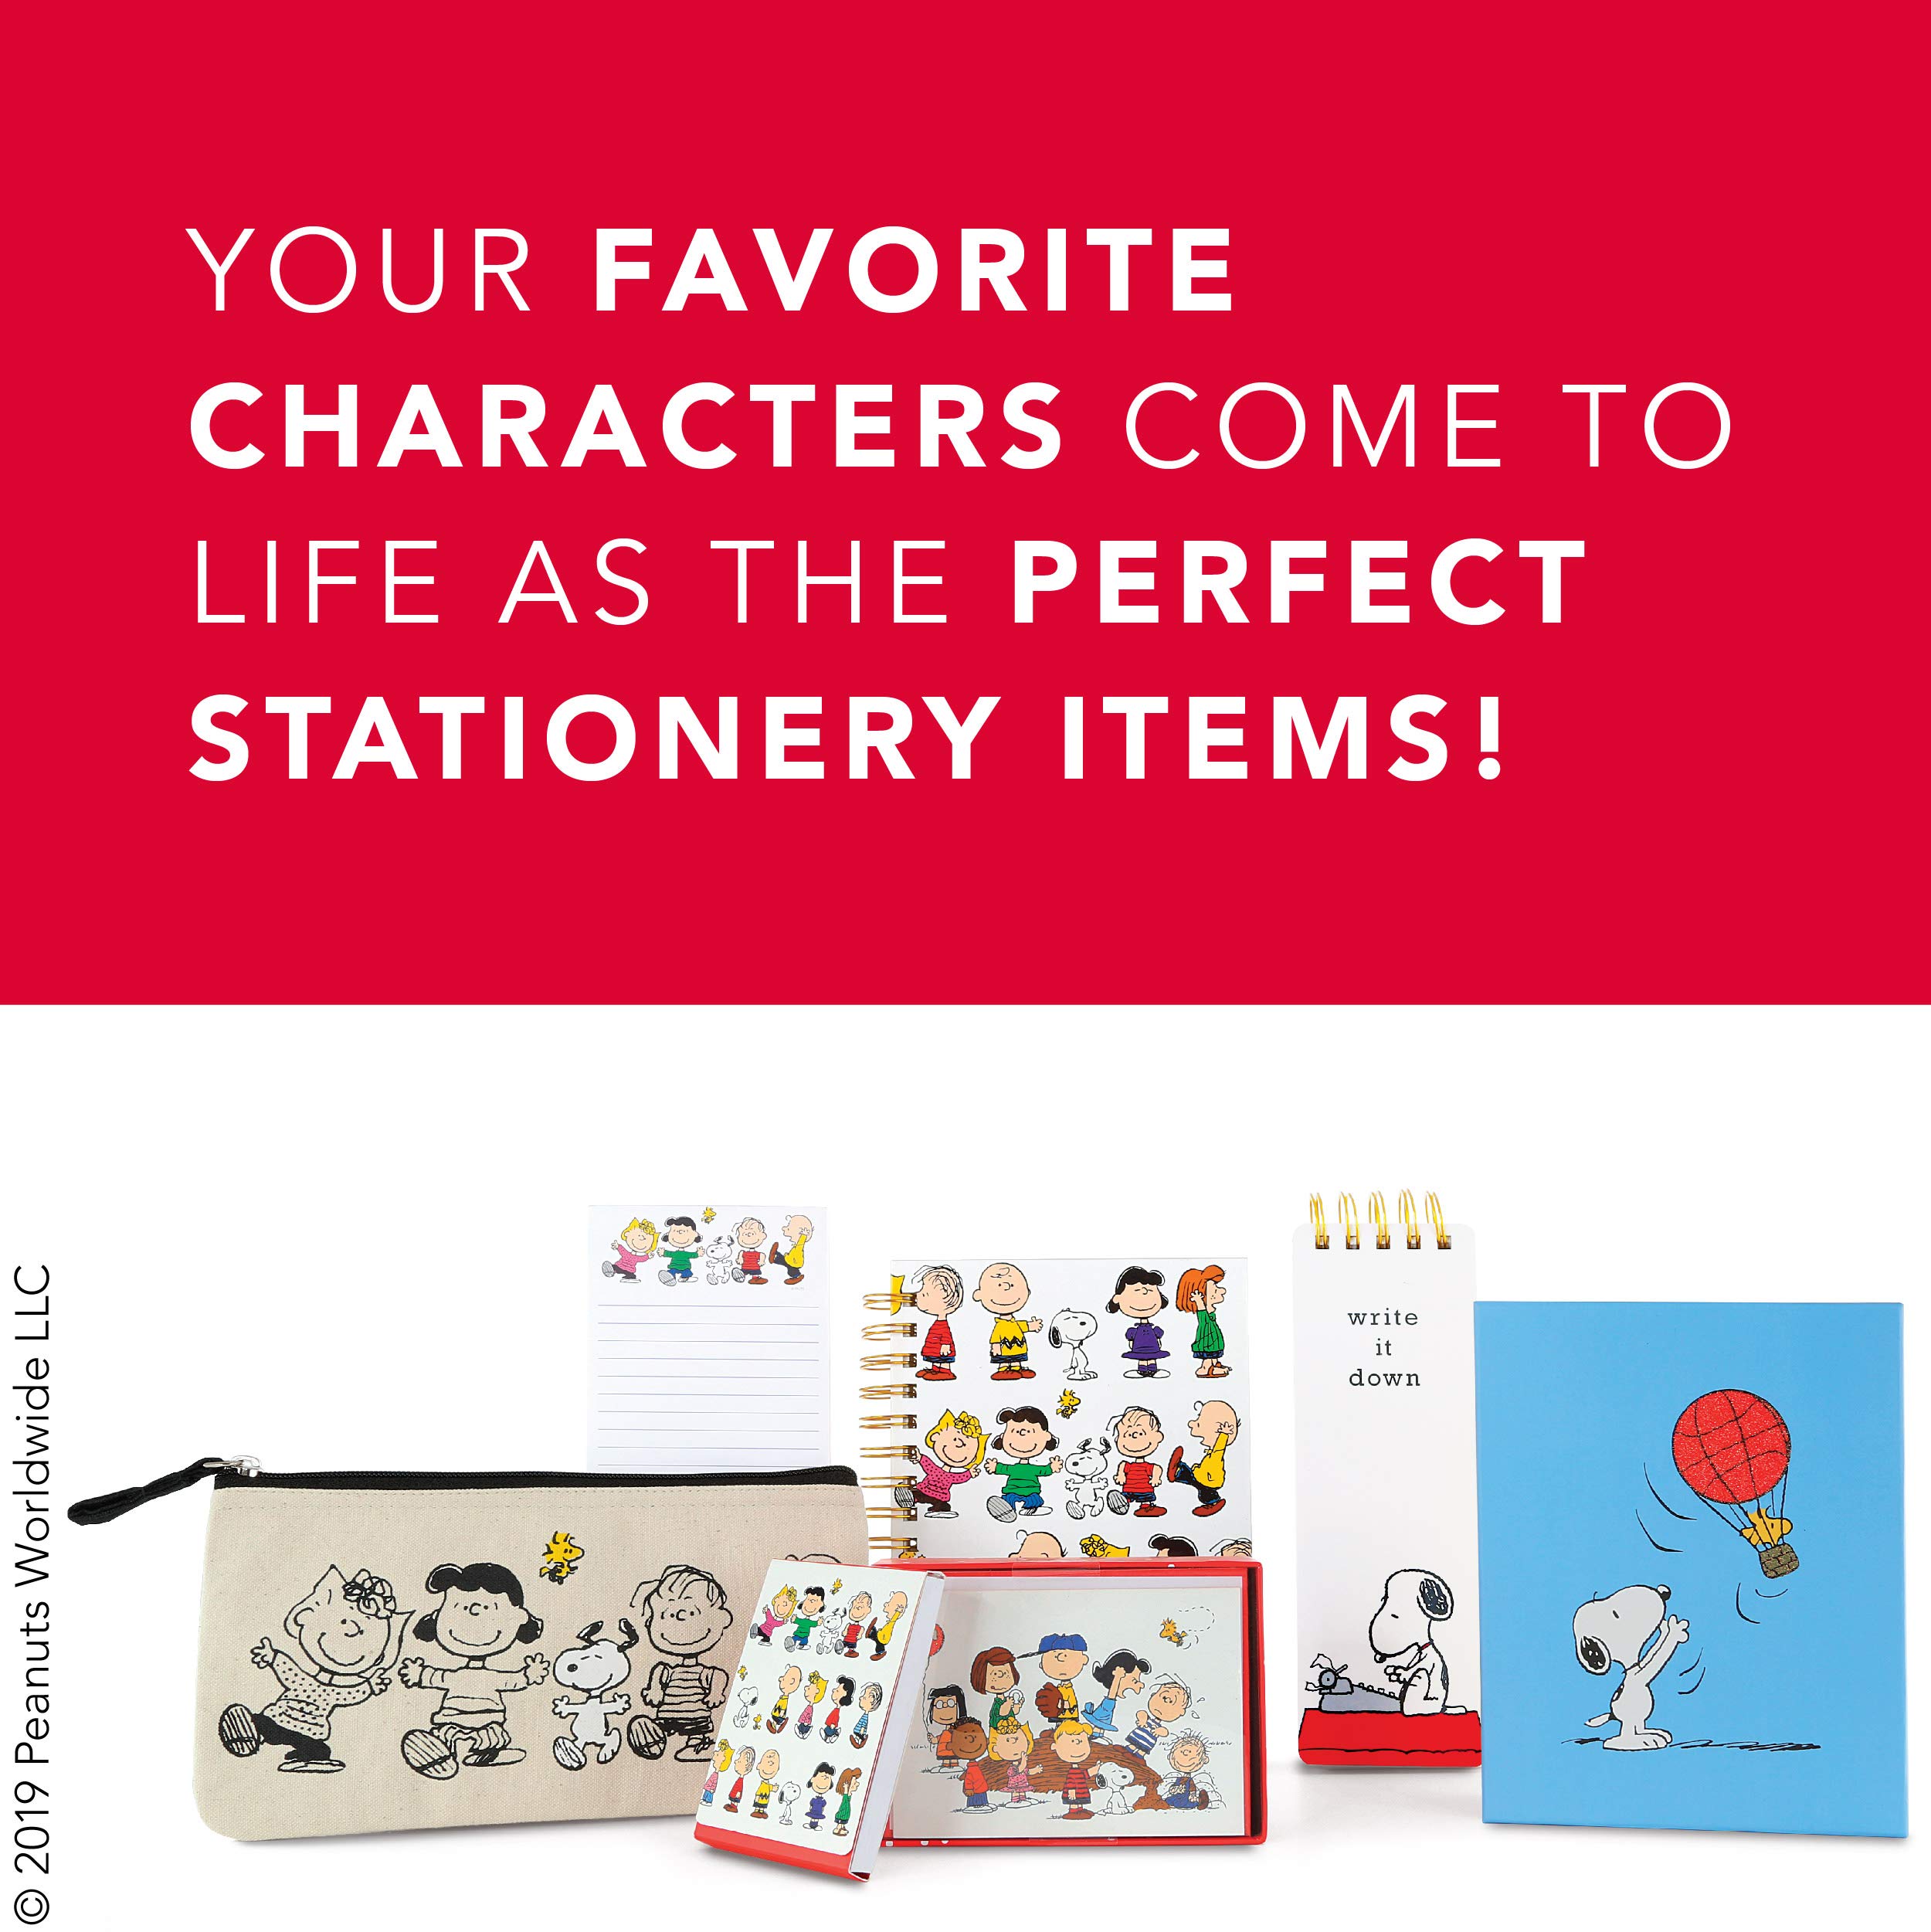 Graphique Peanuts Typewriter Boxed Notecards, 16 Snoopy at Typewriter Cards Embellished with Glitter, with Matching Envelopes and Storage Box, 3.25